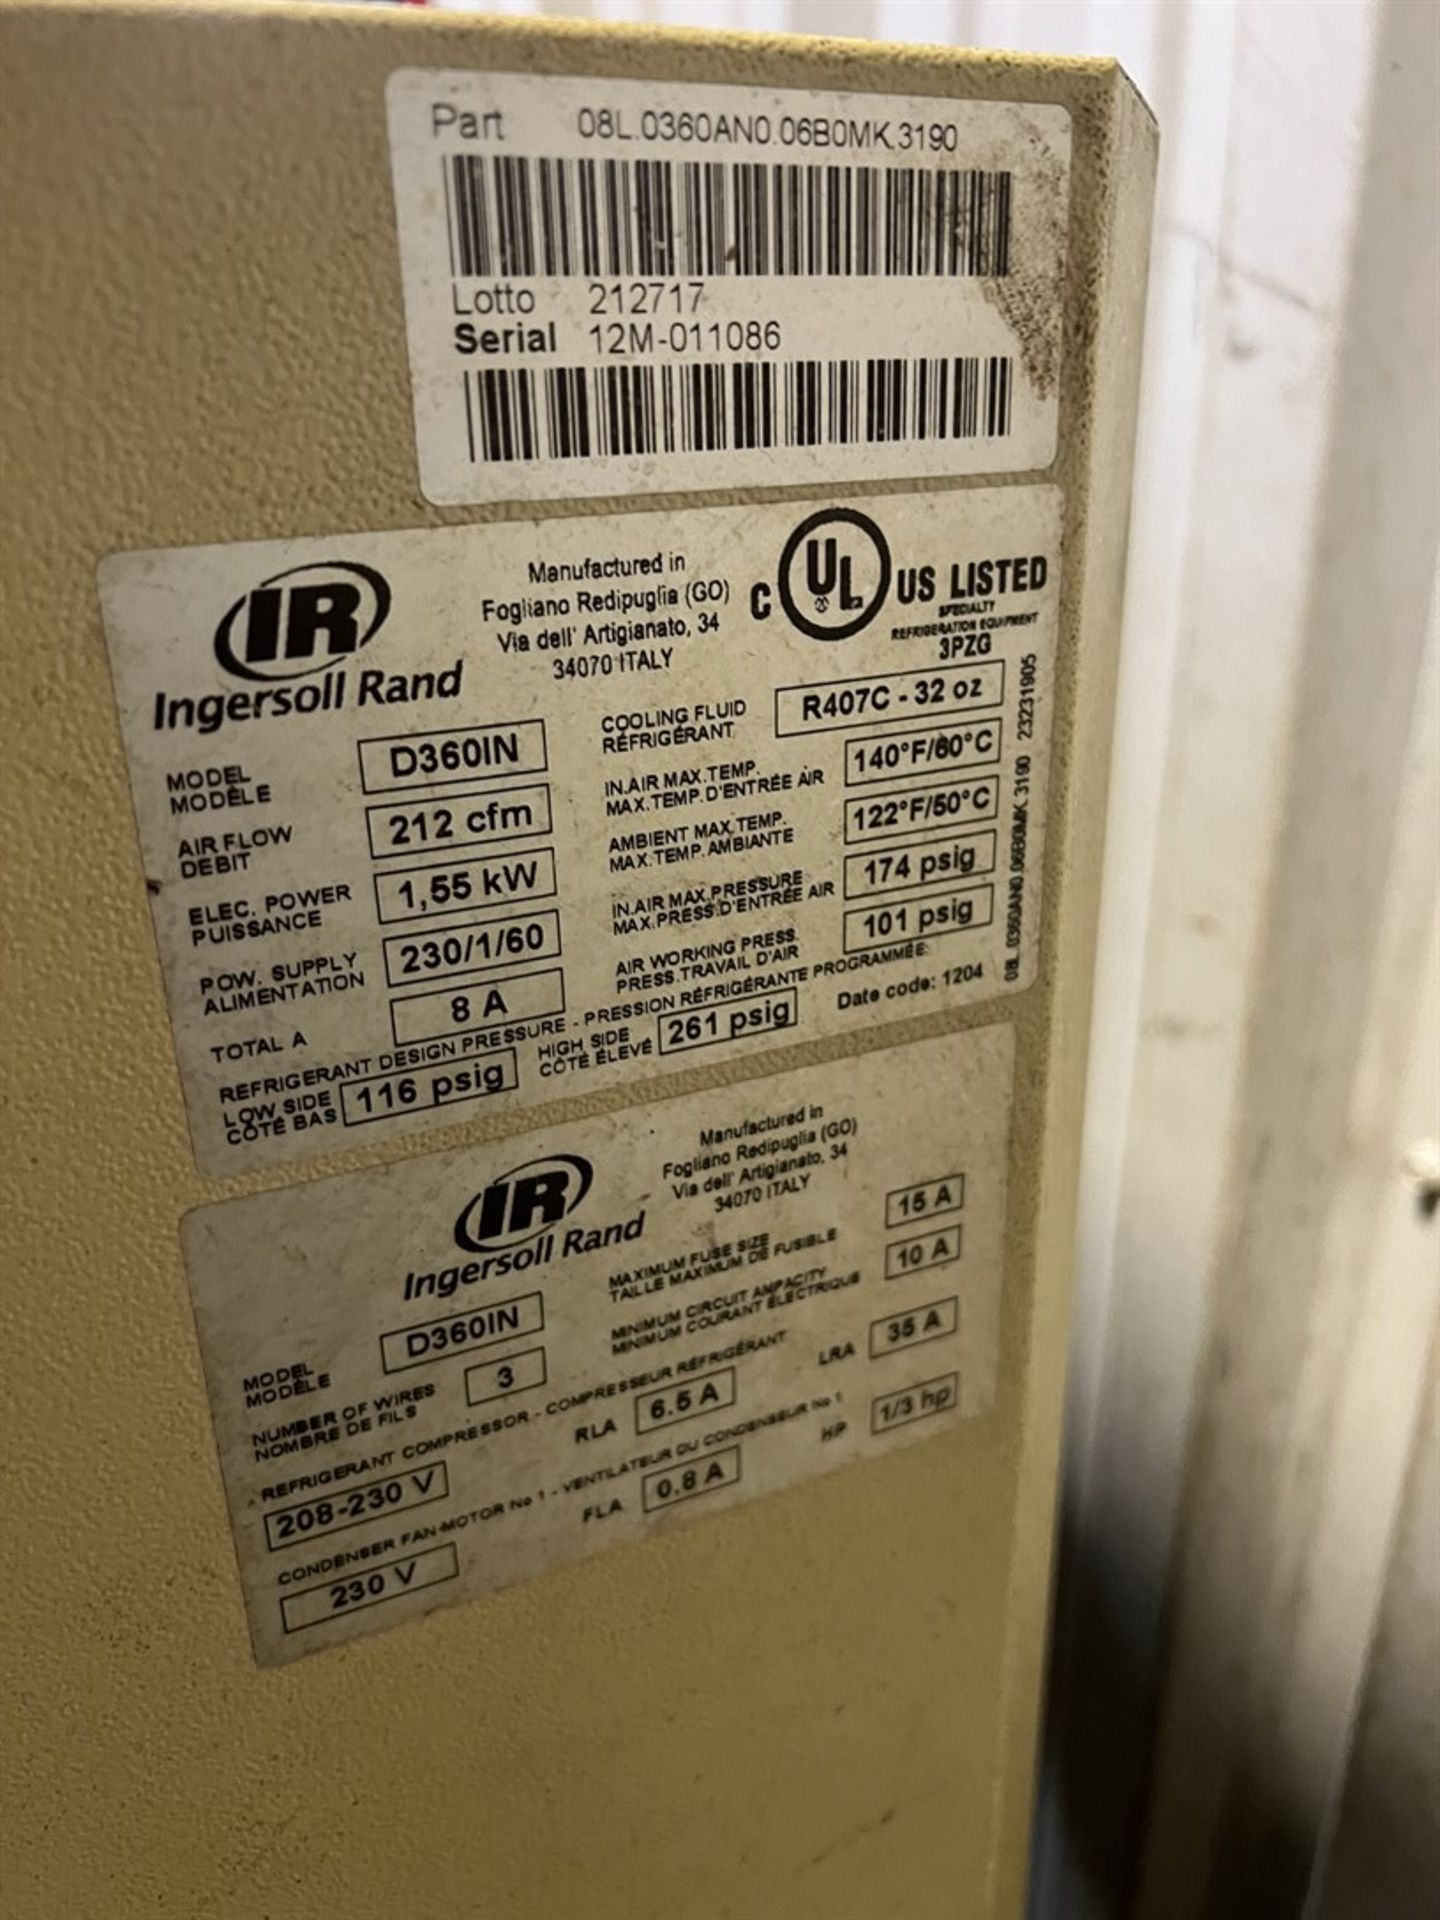 INGERSOLL RAND D360IN Refrigerated Air Dryer, s/n 12M-011086 - Image 5 of 5